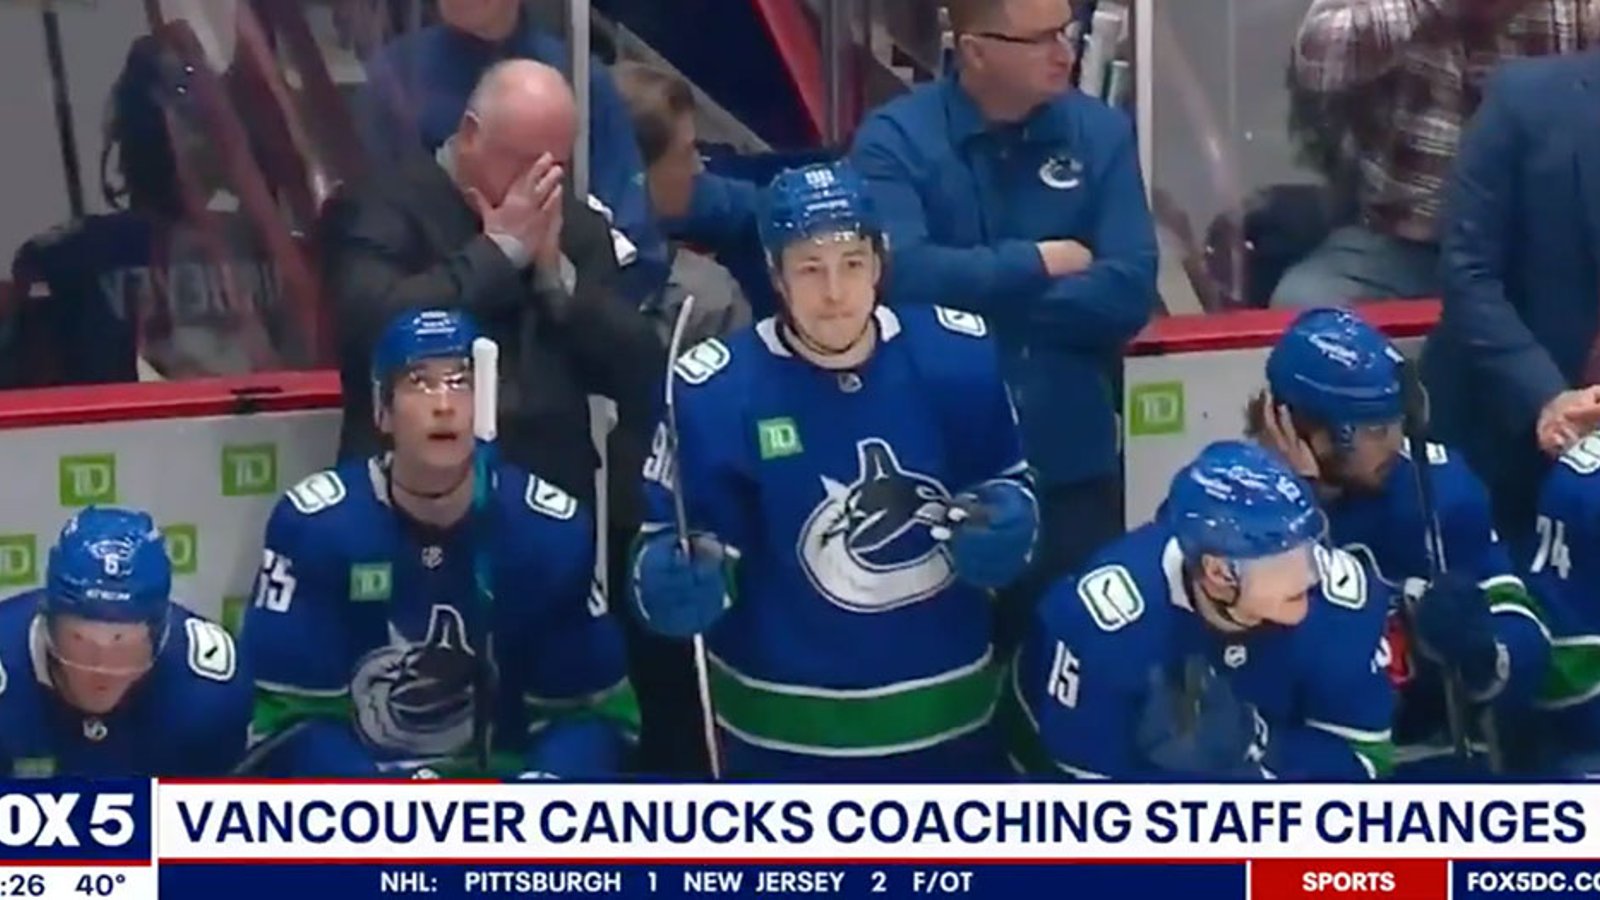 Fox absolutely butchers Canucks news from this past weekend